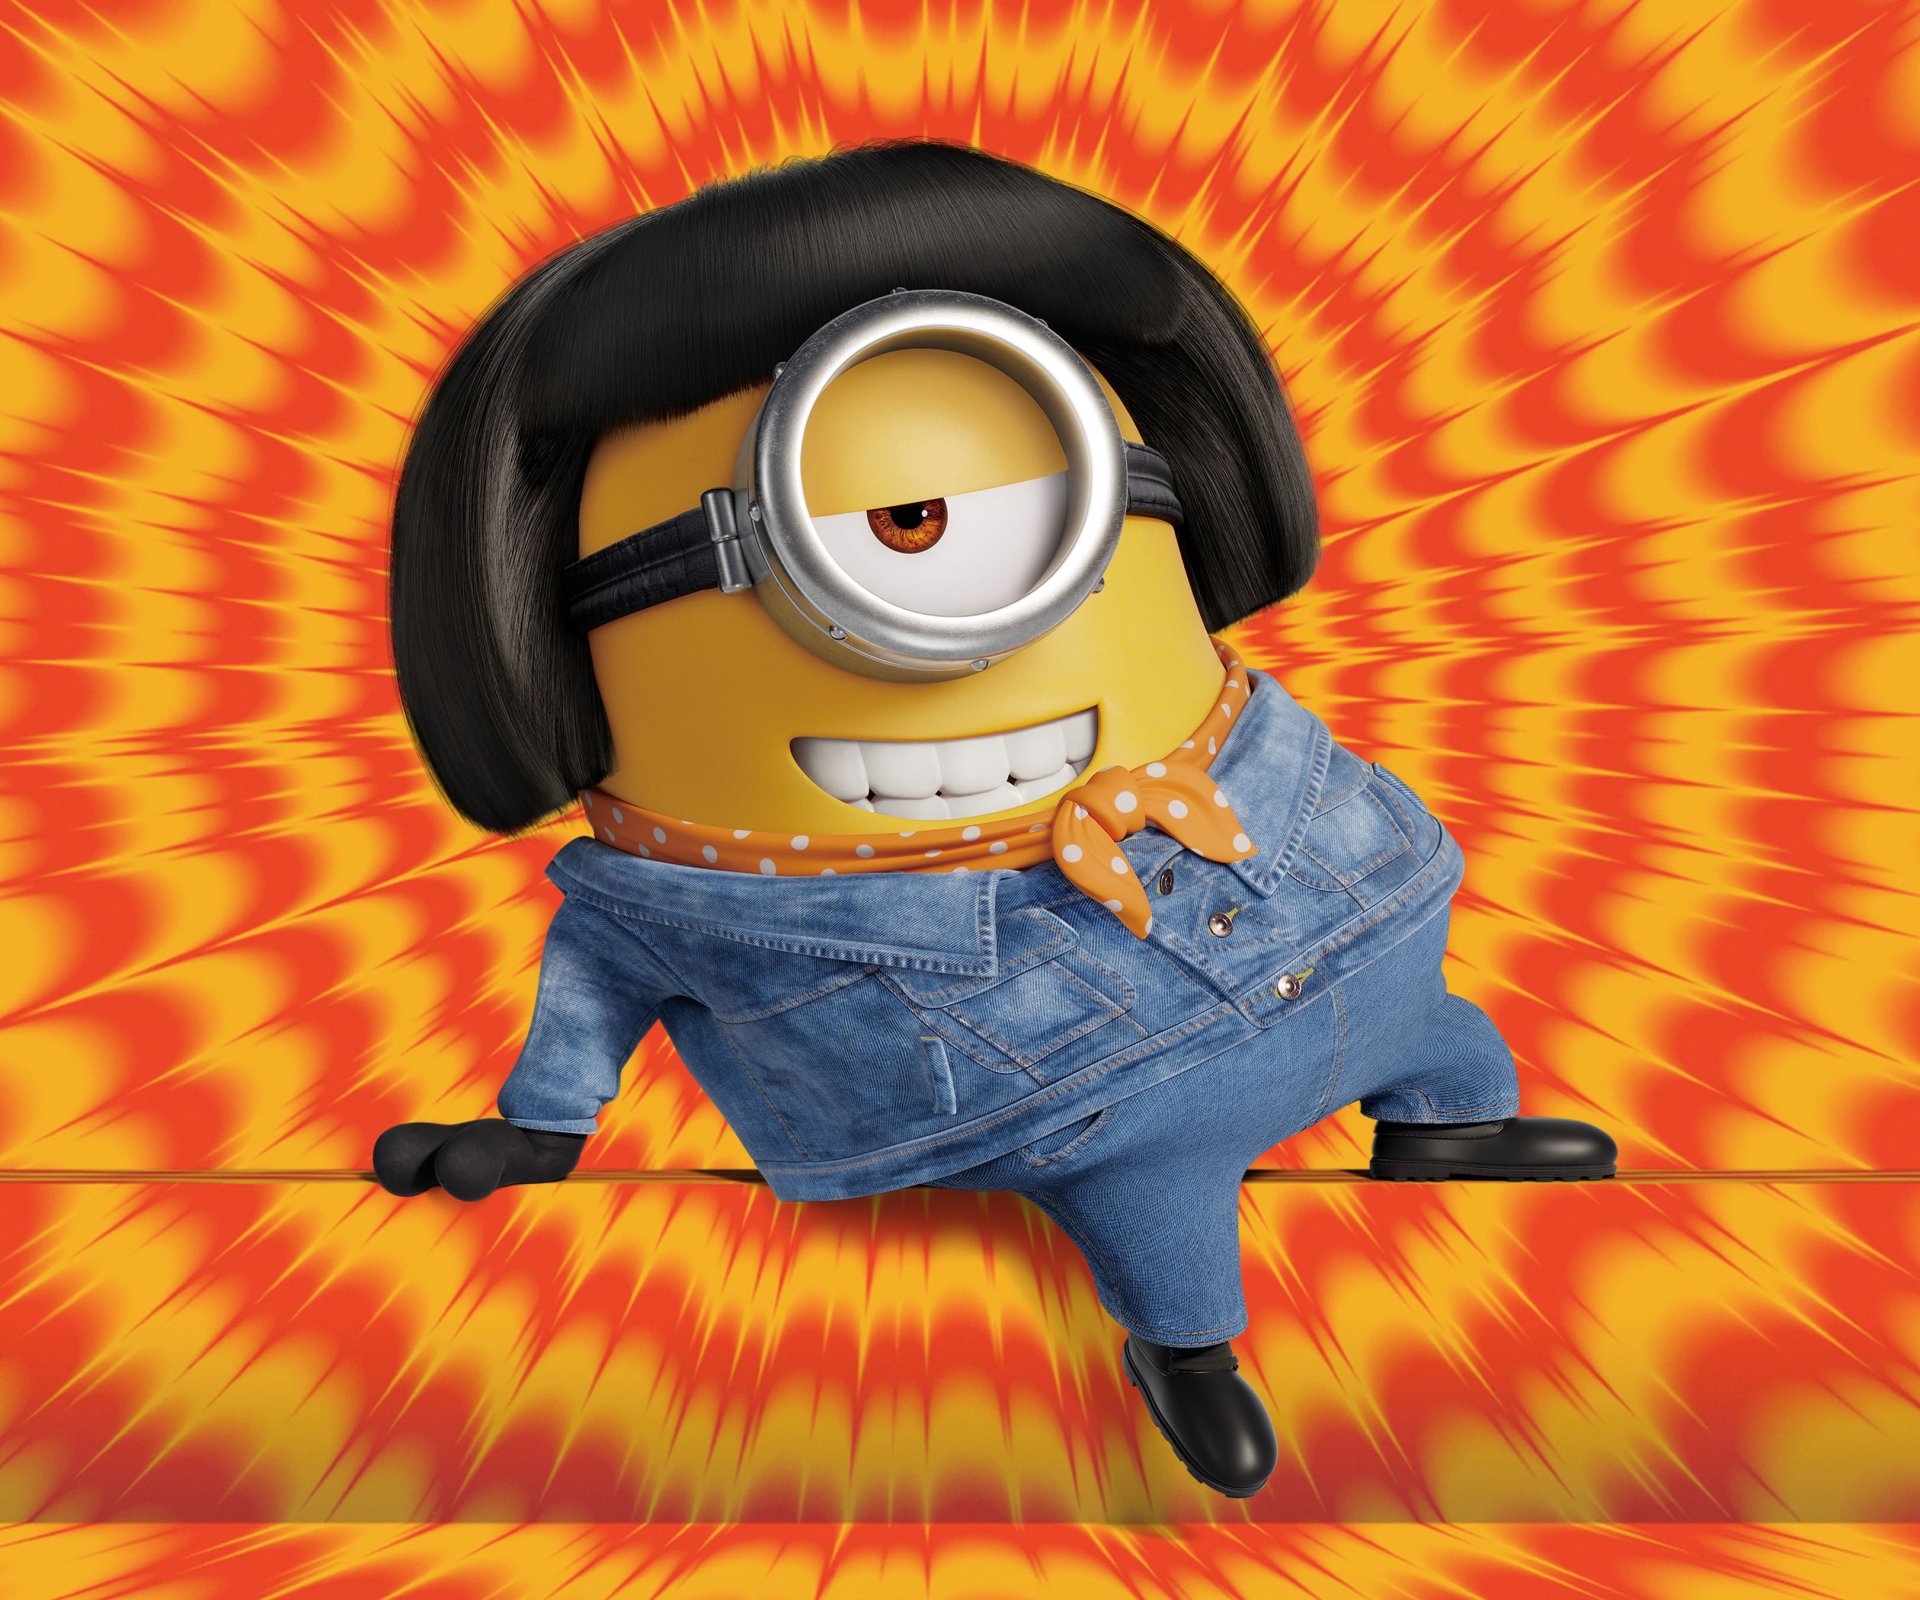 20+ Minions: The Rise of Gru HD Wallpapers and Backgrounds